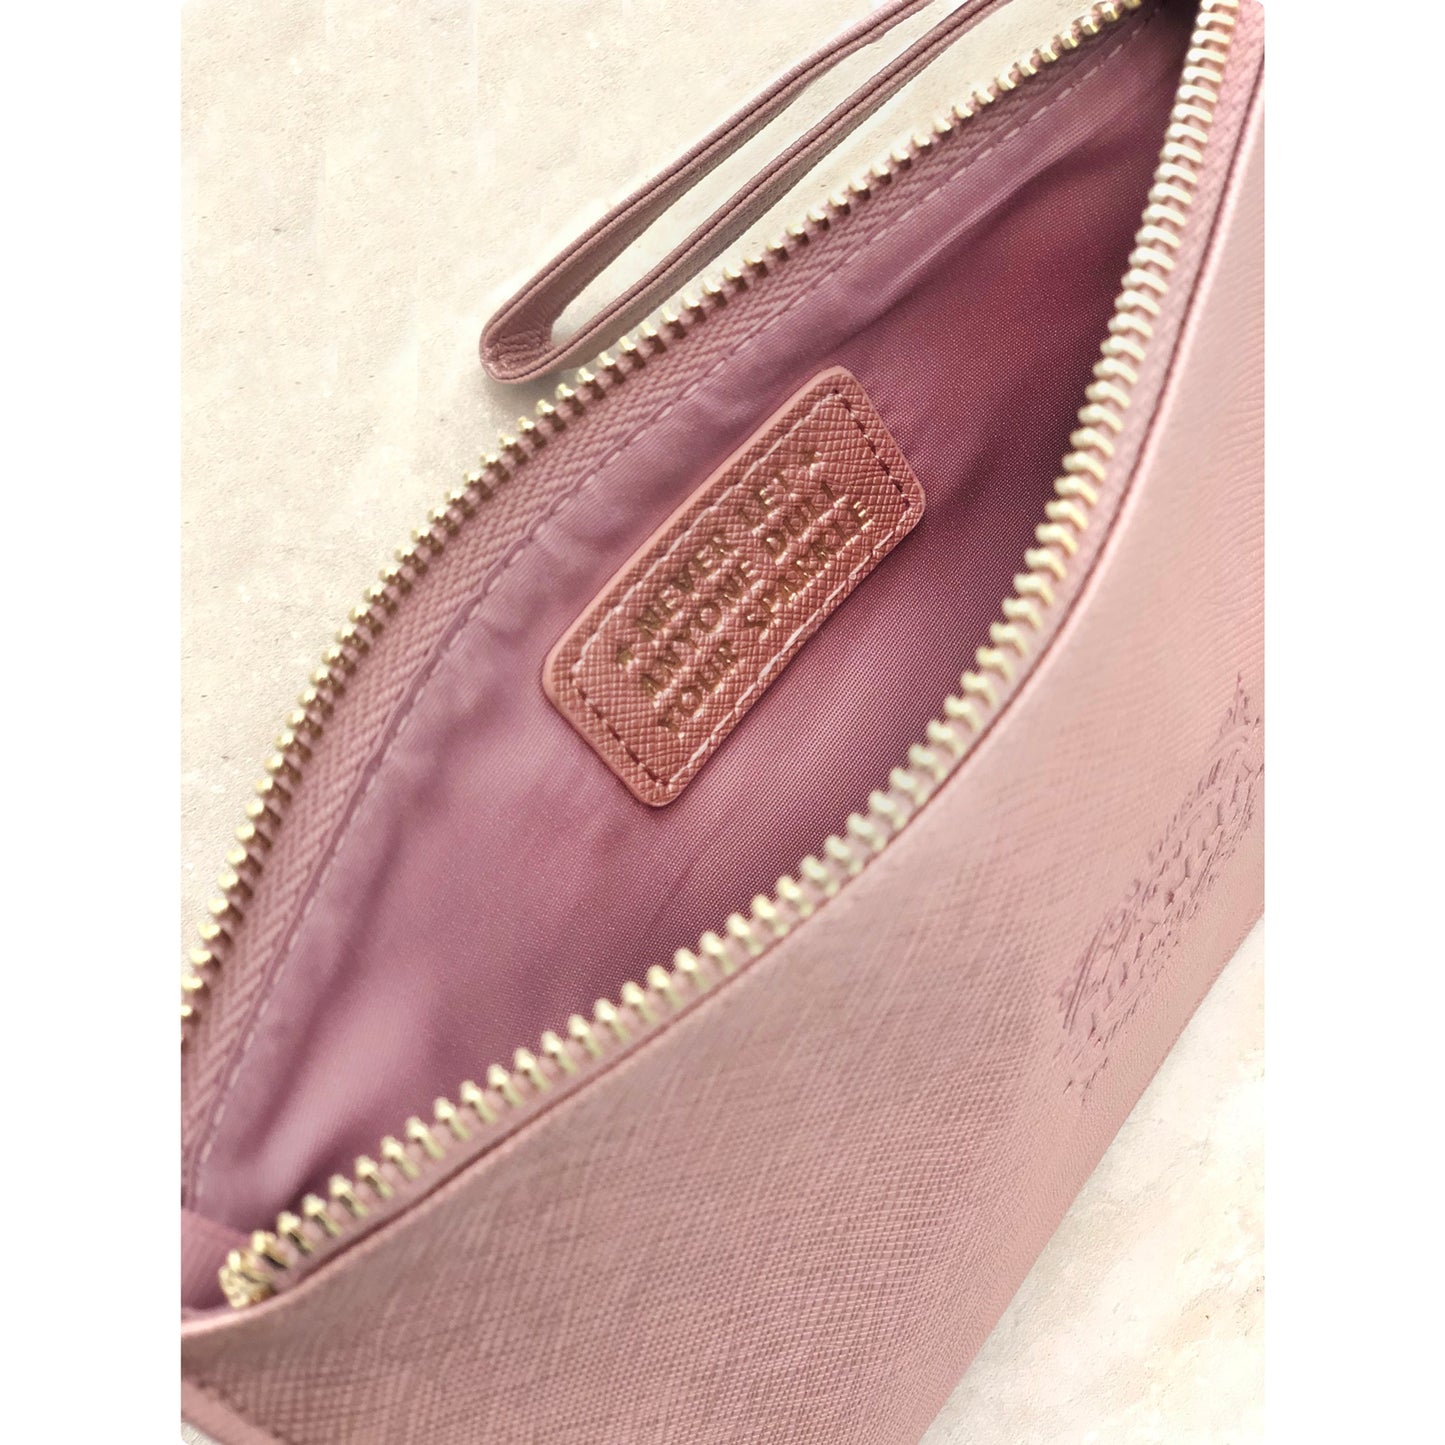 Clutch Bag With Handle & Embossed Text "Joanna"